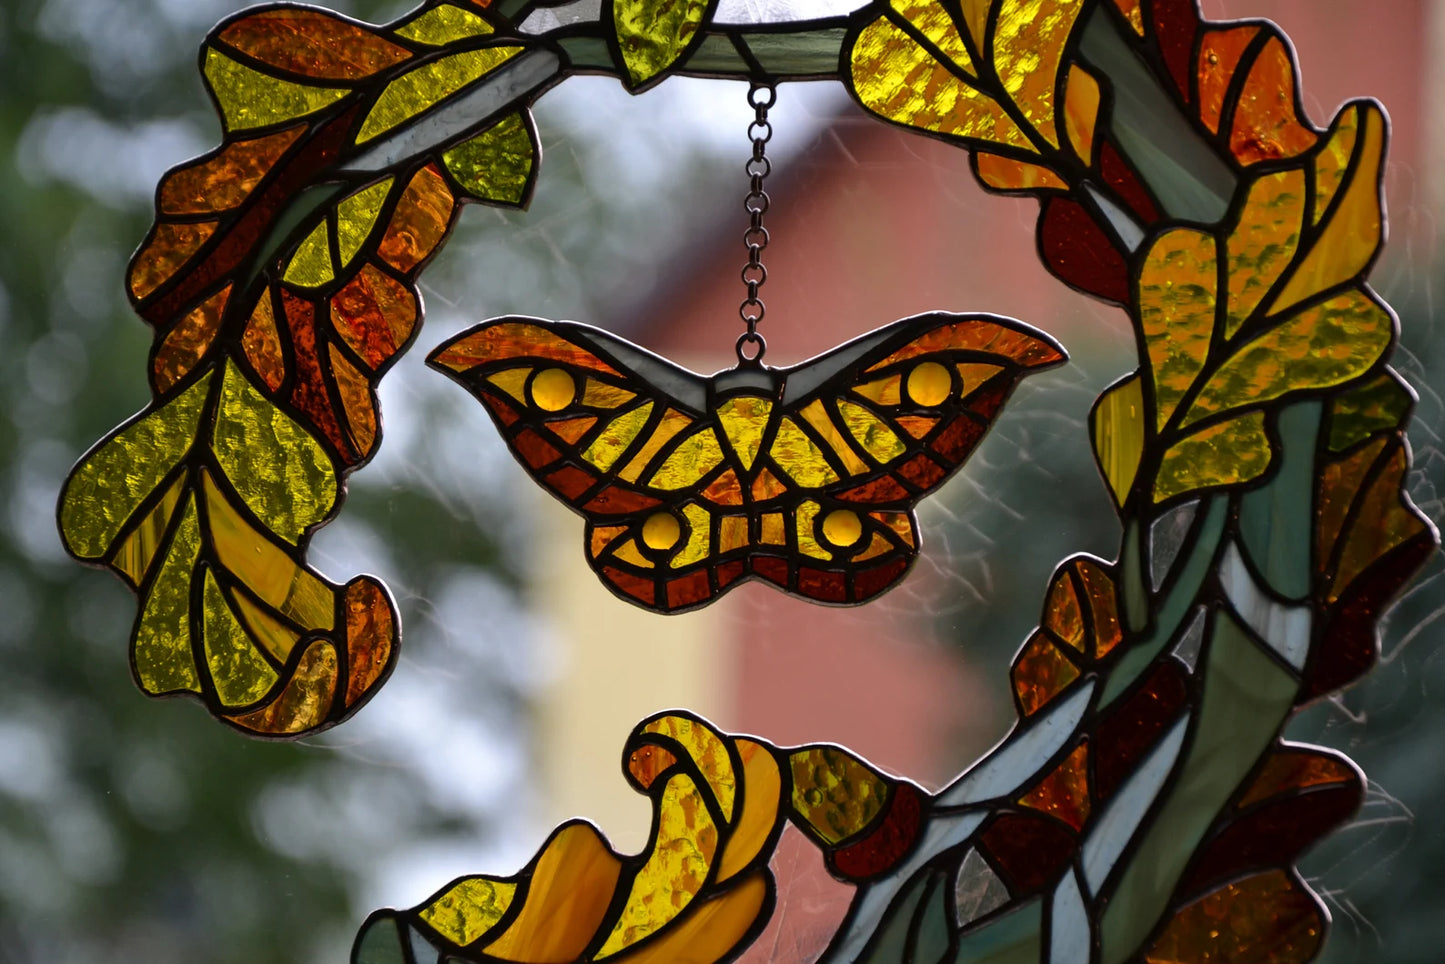 Stained glass window hanging Fall wreath Glass butterfly Living room decor Christmas gift Wall decor Stain glass pendant Garden glass art